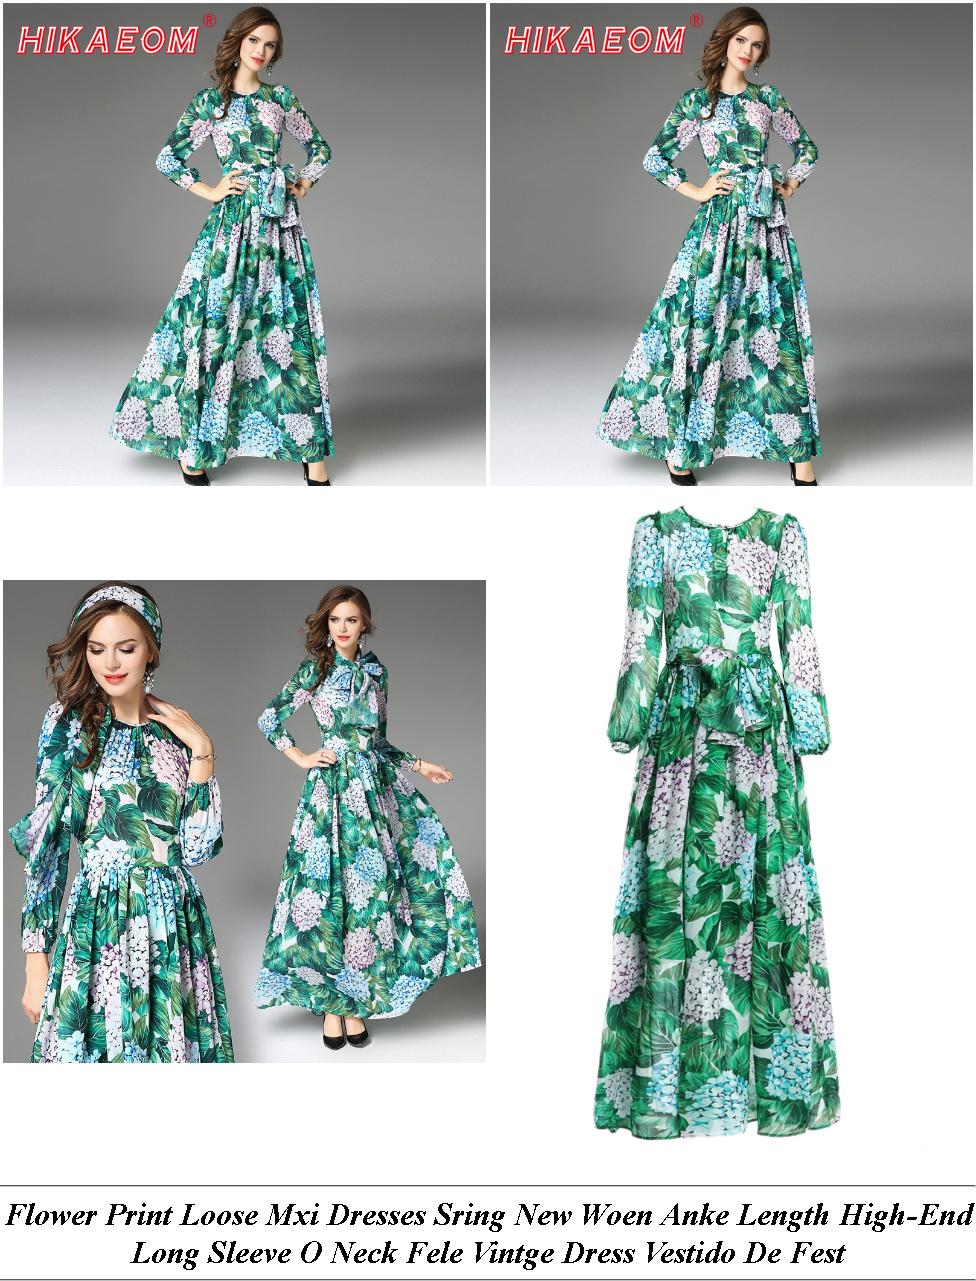 Chiffon Dress Styles In Nigeria - Online Stores Sale - Dress Clothing Store City